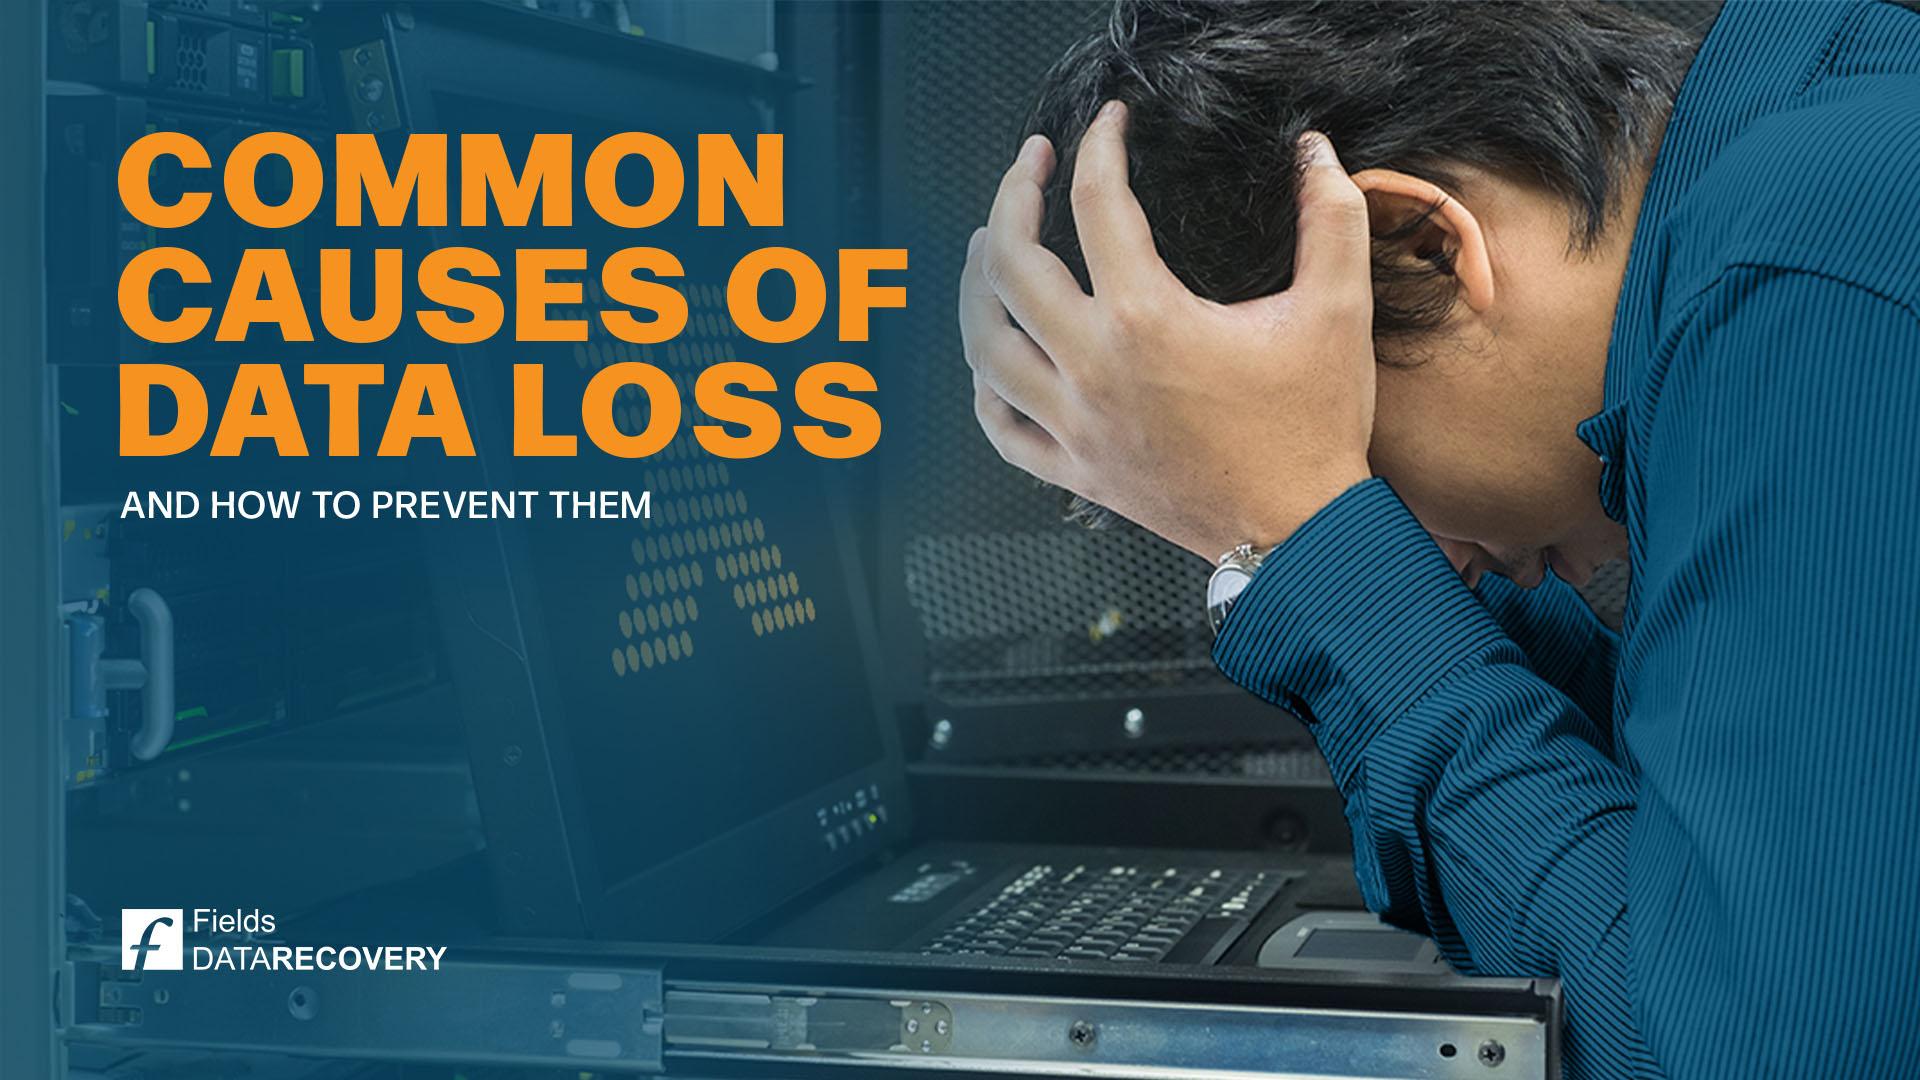 Don't Let Your Data Slip Away: Common Causes of Data Loss and How to Prevent Them